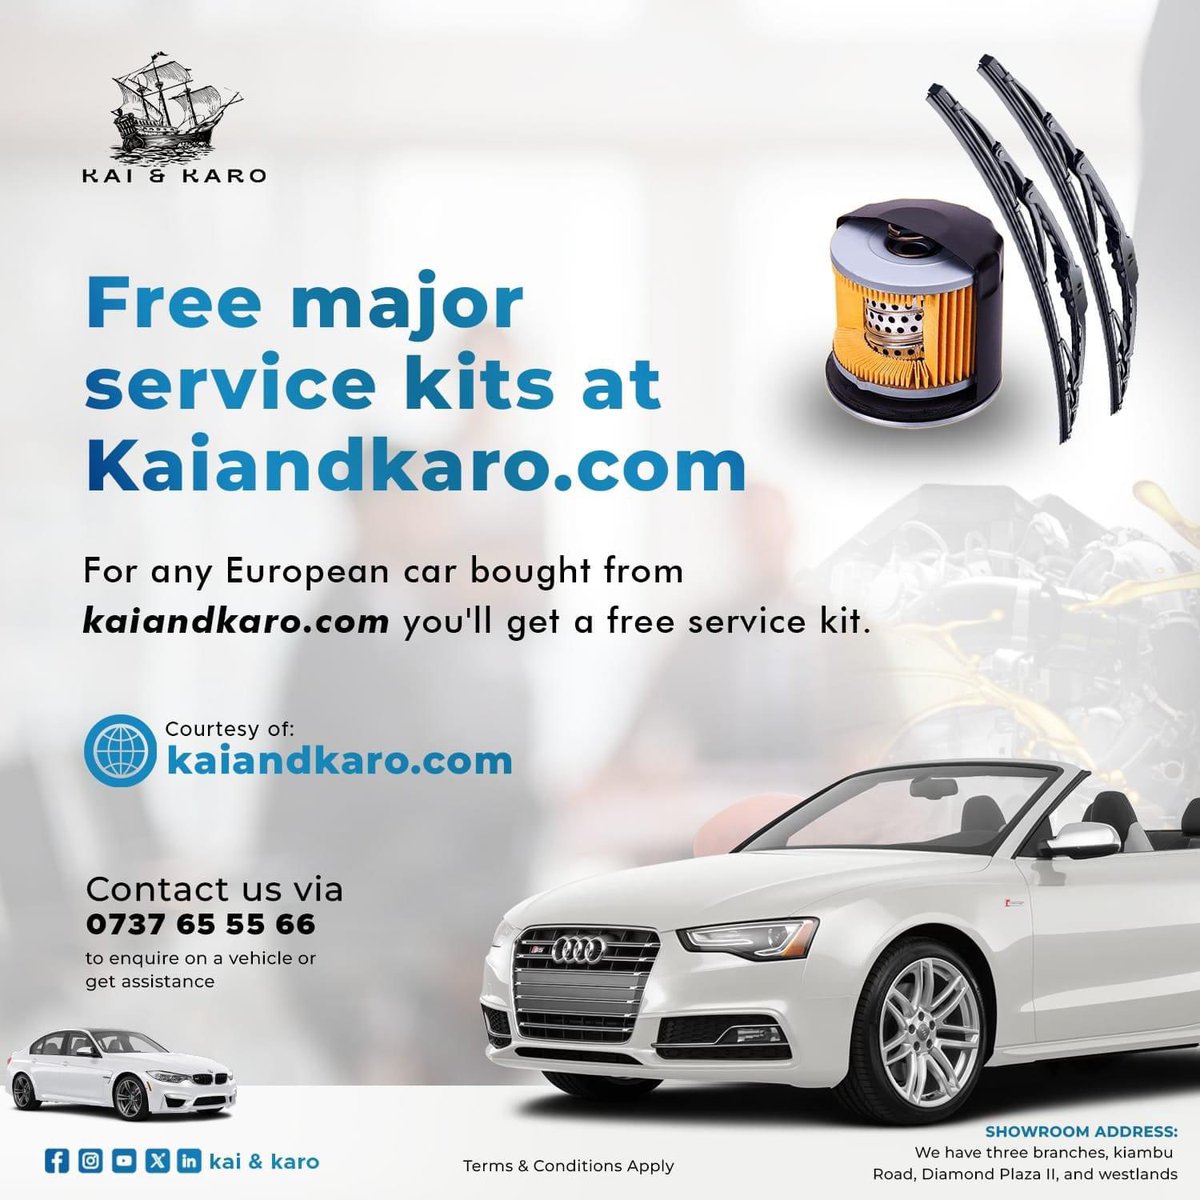 For the next one month, with every purchase of a European car from kaiandkaro.com, you get Free Major service parts kit courtesy of Auto Republik Car Parts LTD ✅️ Visit kaiandkaro.com to view all the European cars we have in stock . Contact us via 0737665566